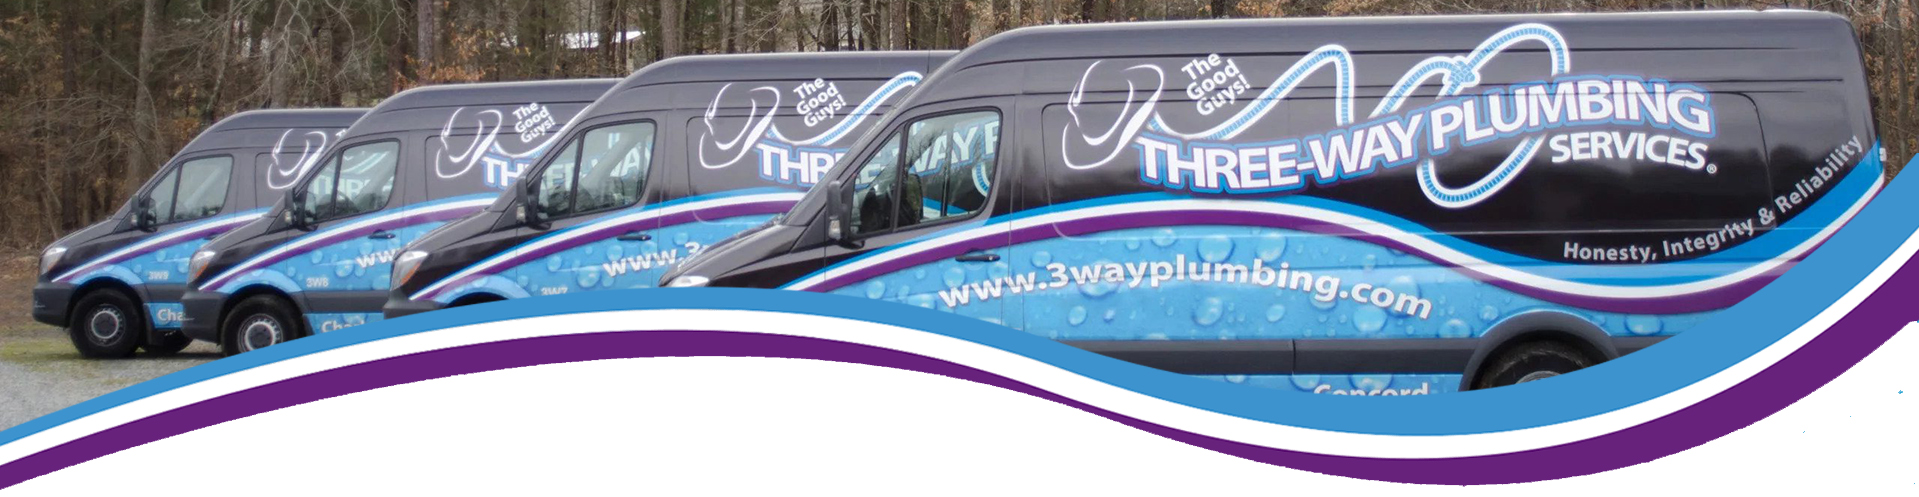 Banner of Three Way Plumbing vans parked next to eachother